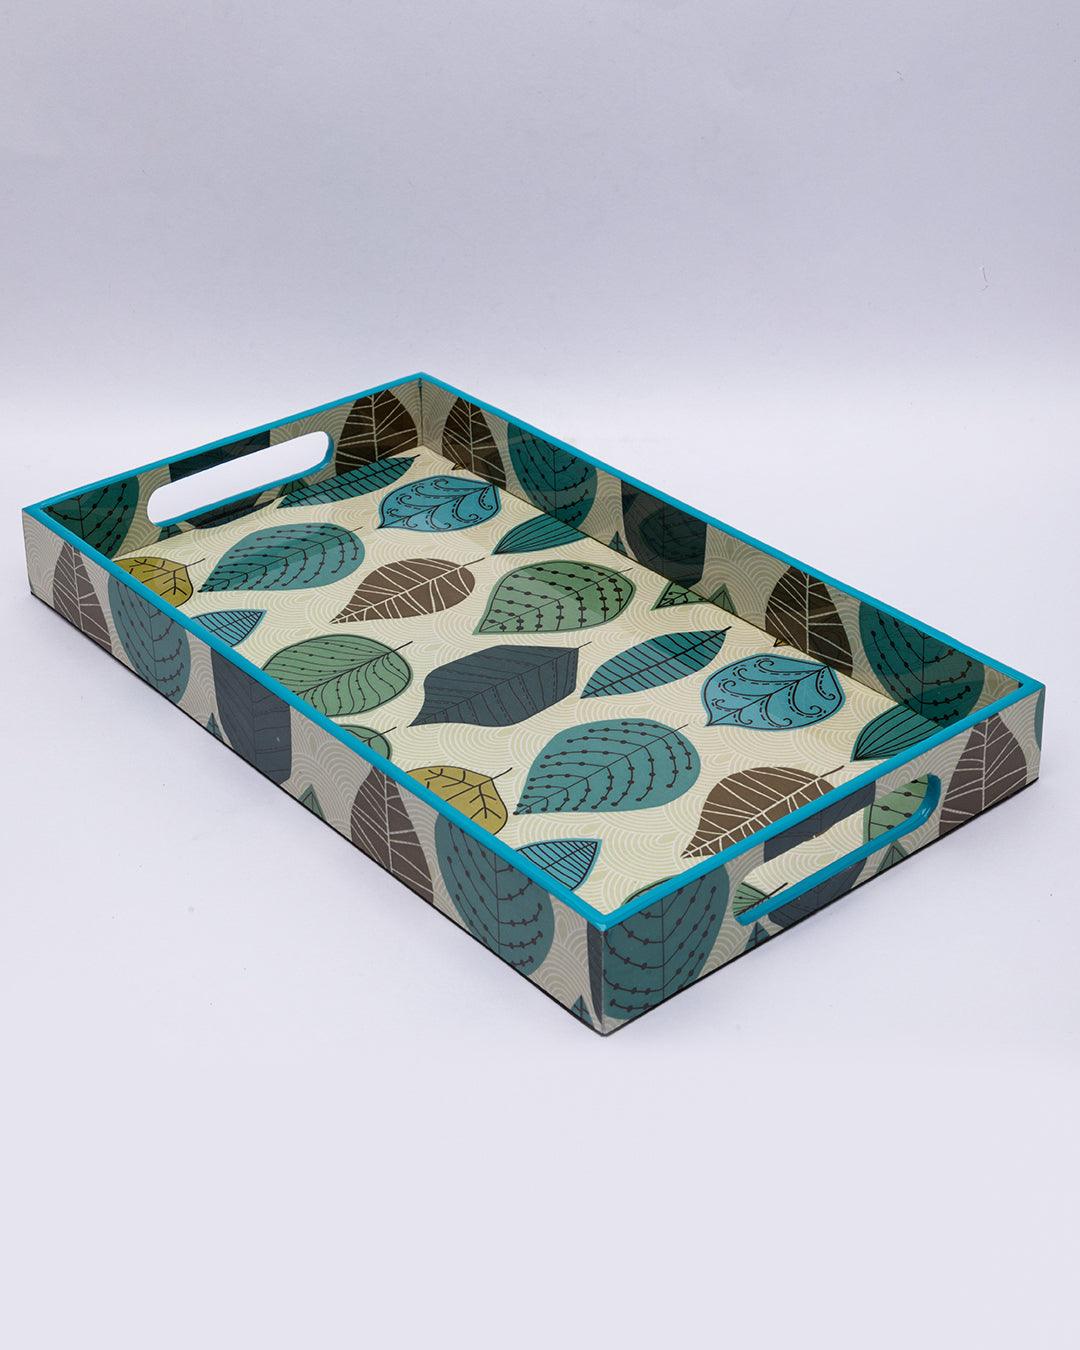 Market99 Decorative Serving Tray, Wooden Tray with Handles, Nature Inspired Design Tray, Home Décor, Medium, Rectangular, Multicolour, MDF - MARKET 99